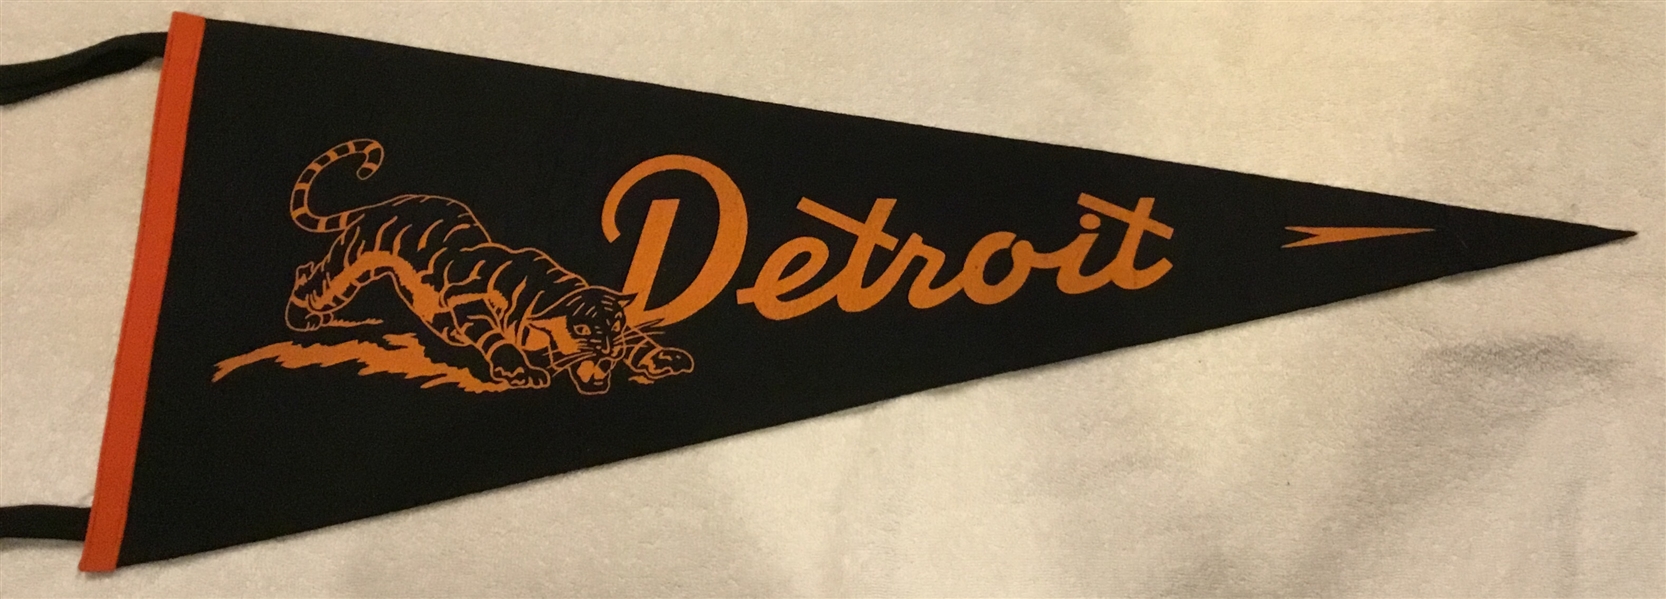 30's DETROIT TIGERS PENNANT